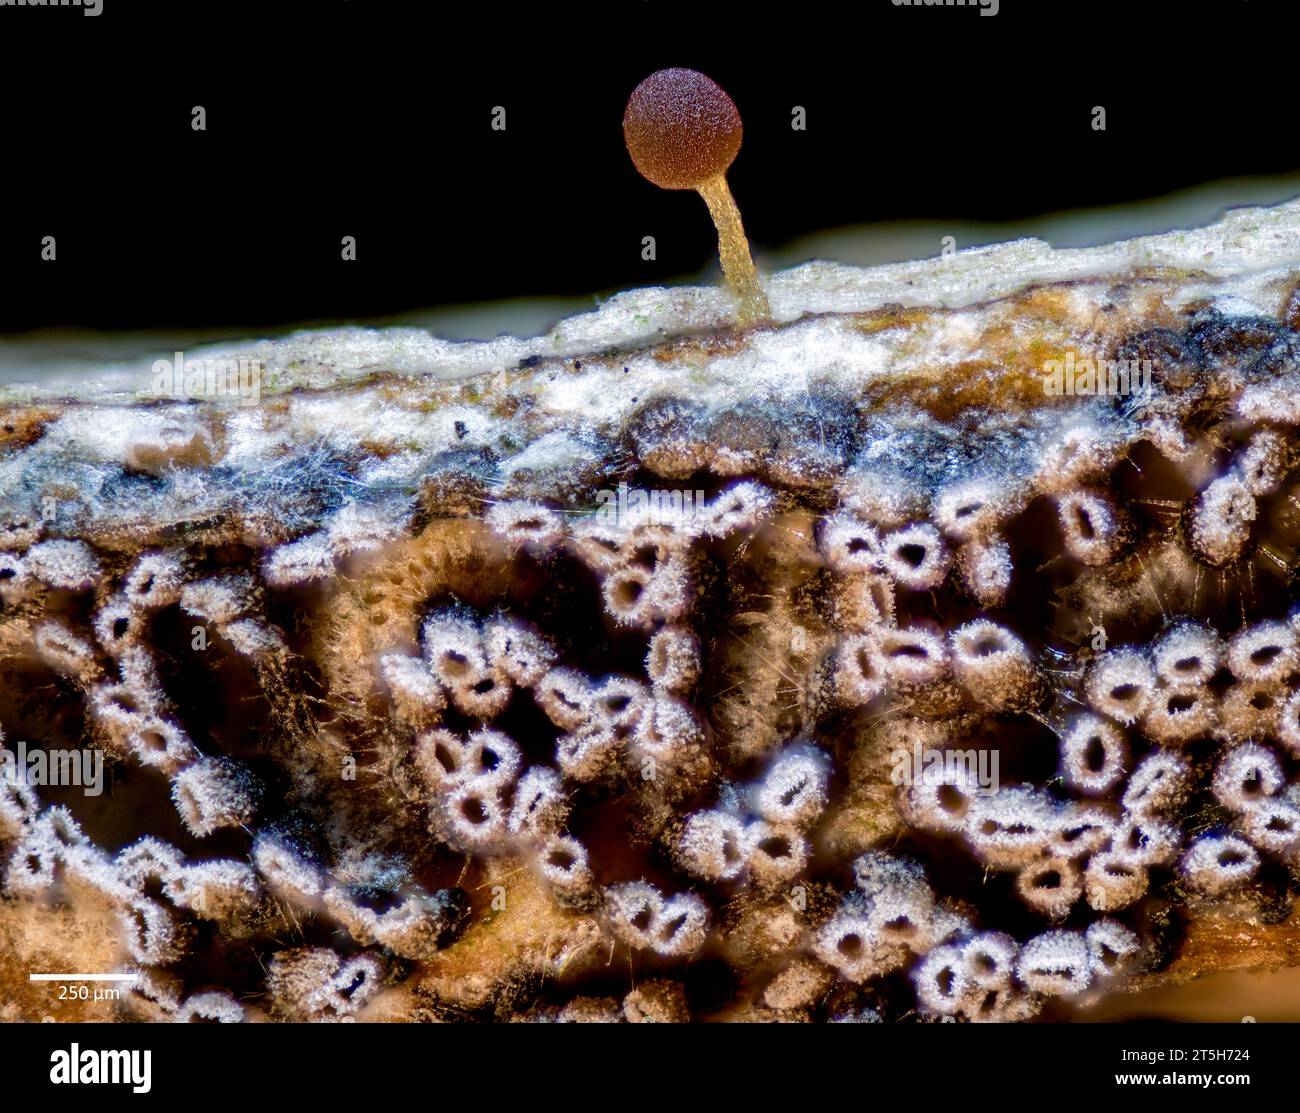 Plasmodium and sporangia of the slime mold Trichia sp. Growing from wood of Acer sp. collected from Hidra, south-western Norway. Fruiting bodies from Stock Photo